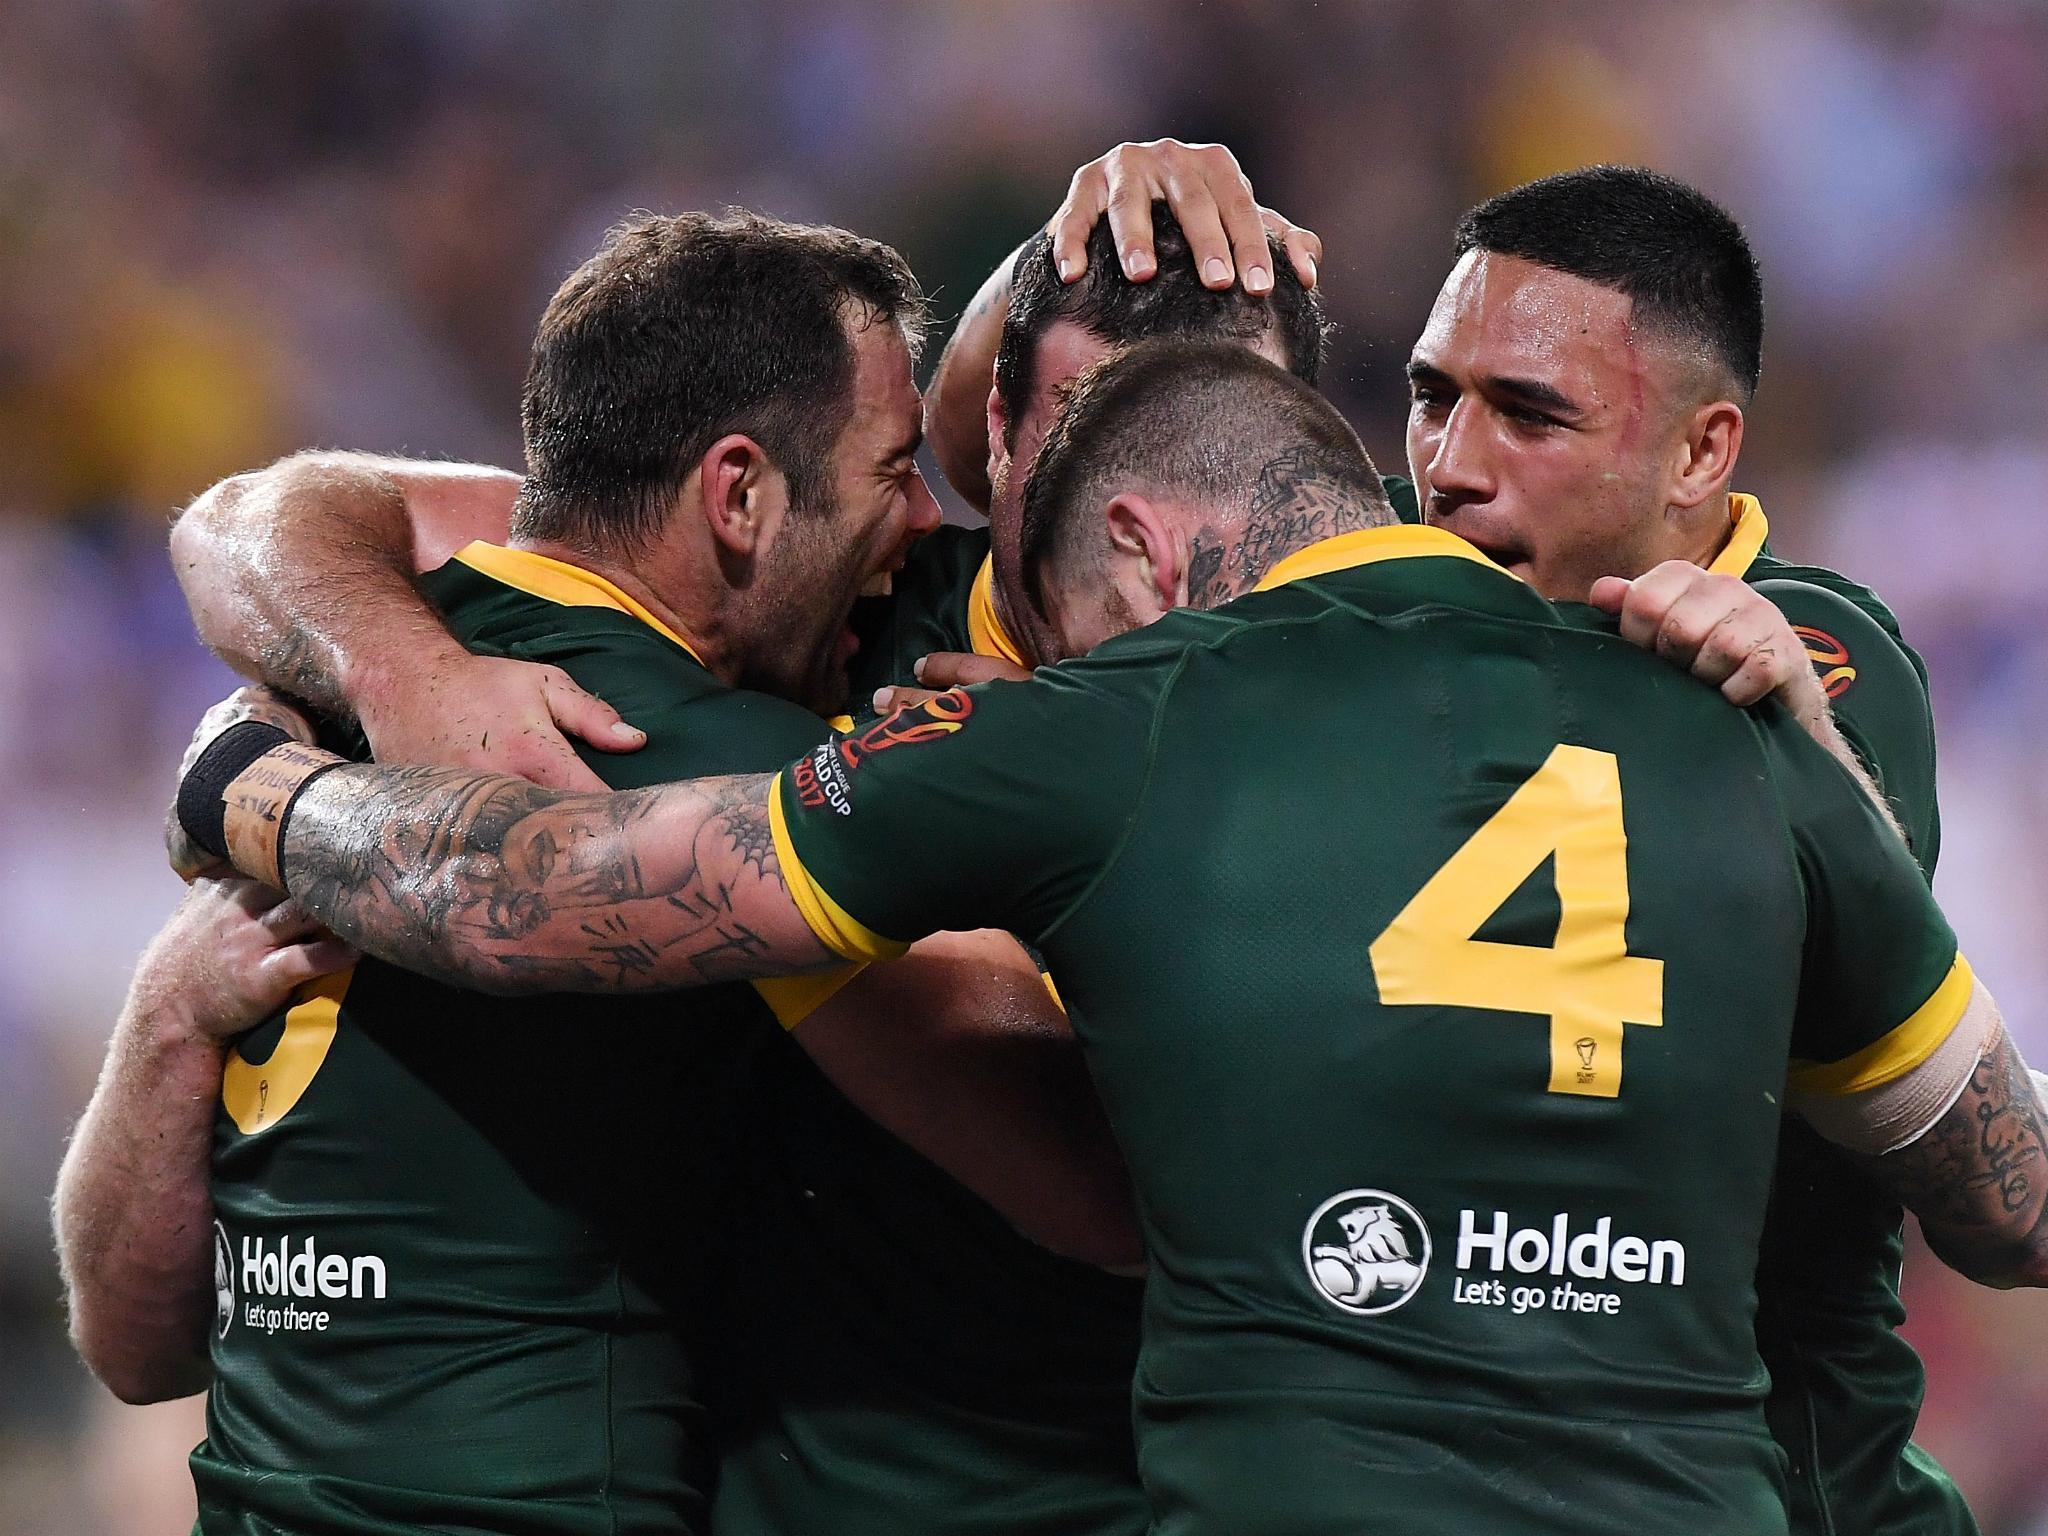 Rugby League World Cup final live England suffer narrow 6-0 defeat to see Australia retain their title The Independent The Independent